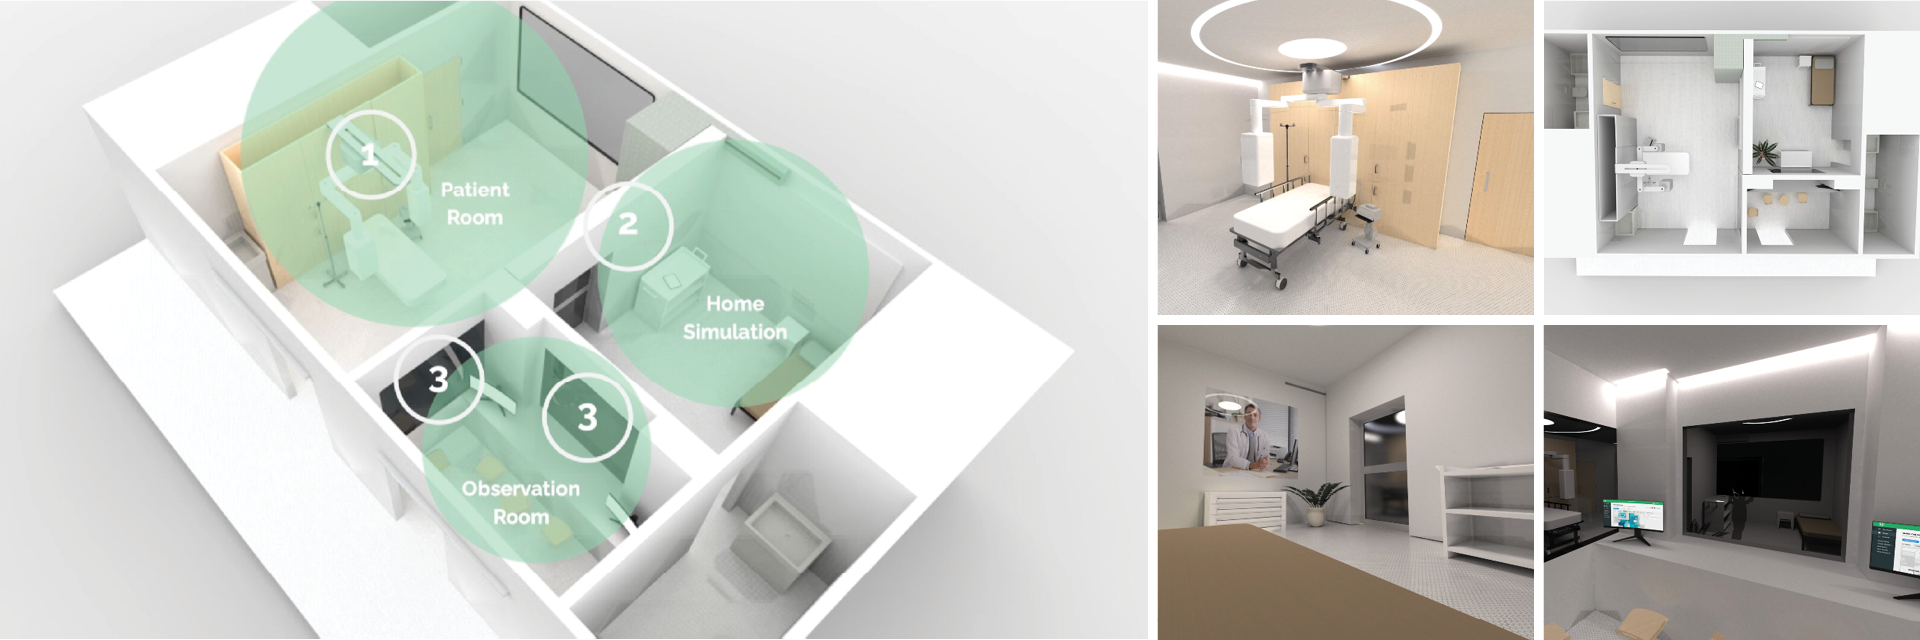 Several renders of a hospital room layout.